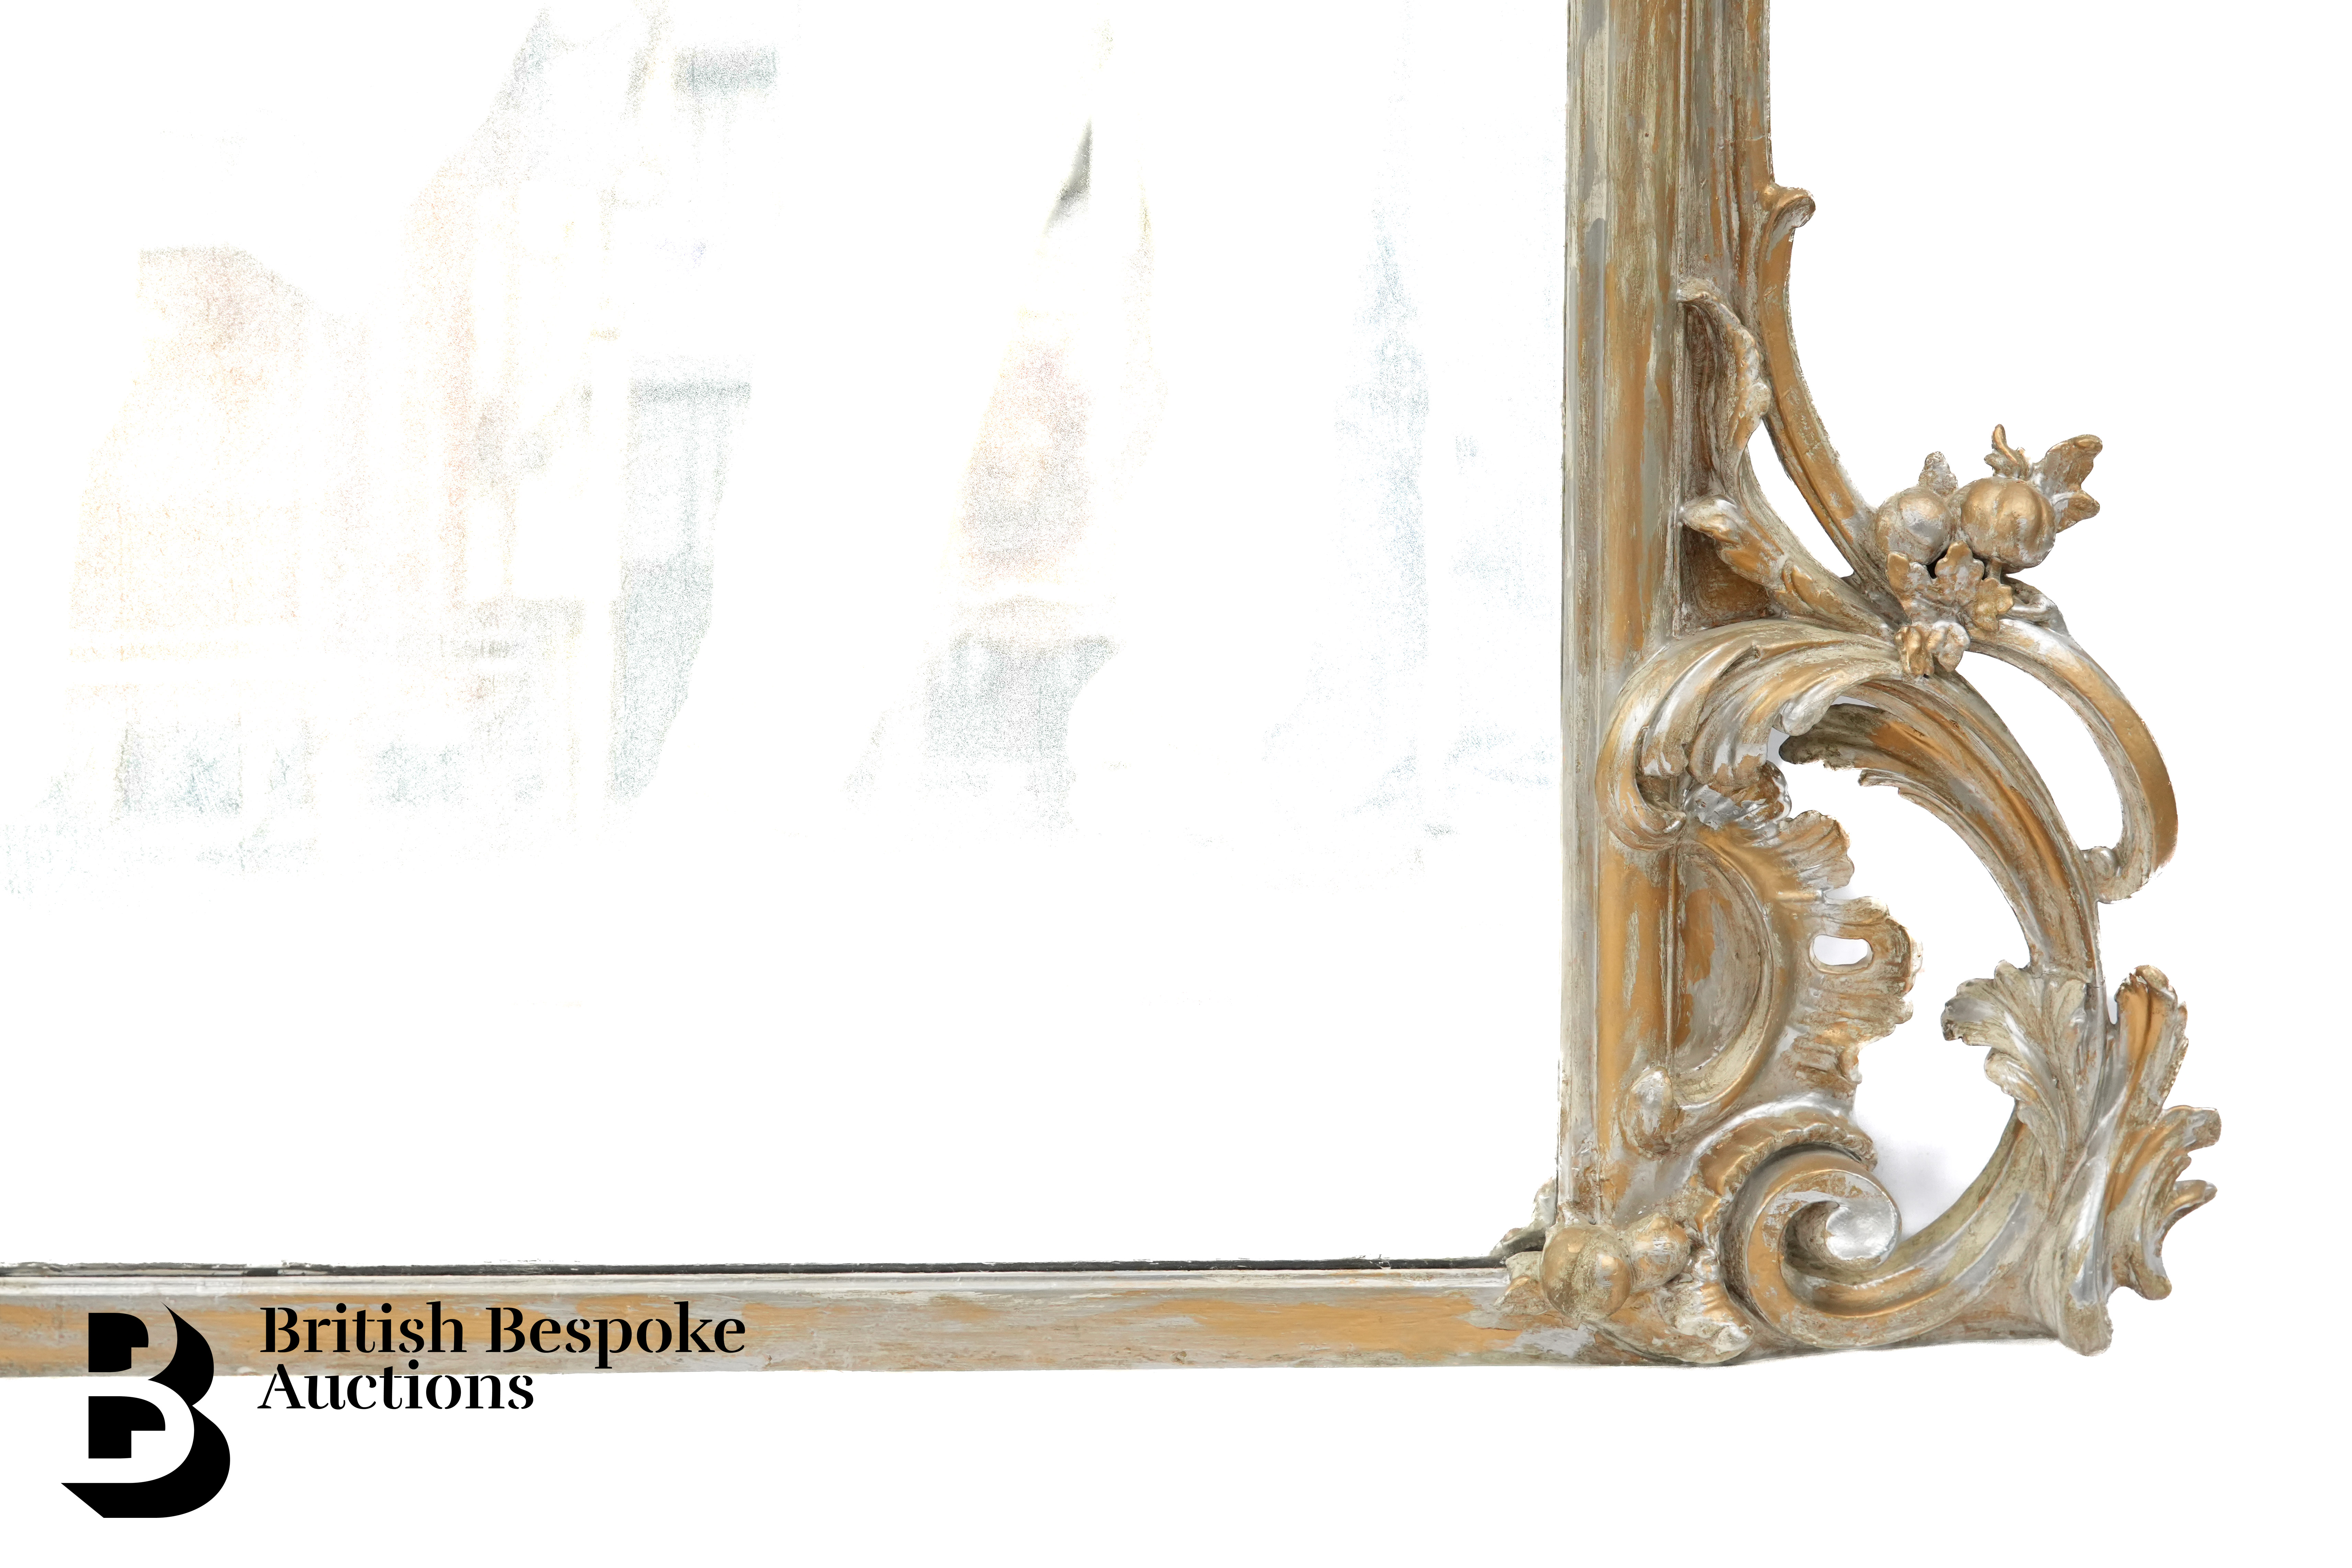 Substantial 20th Century Gilt Mirror - Image 5 of 9